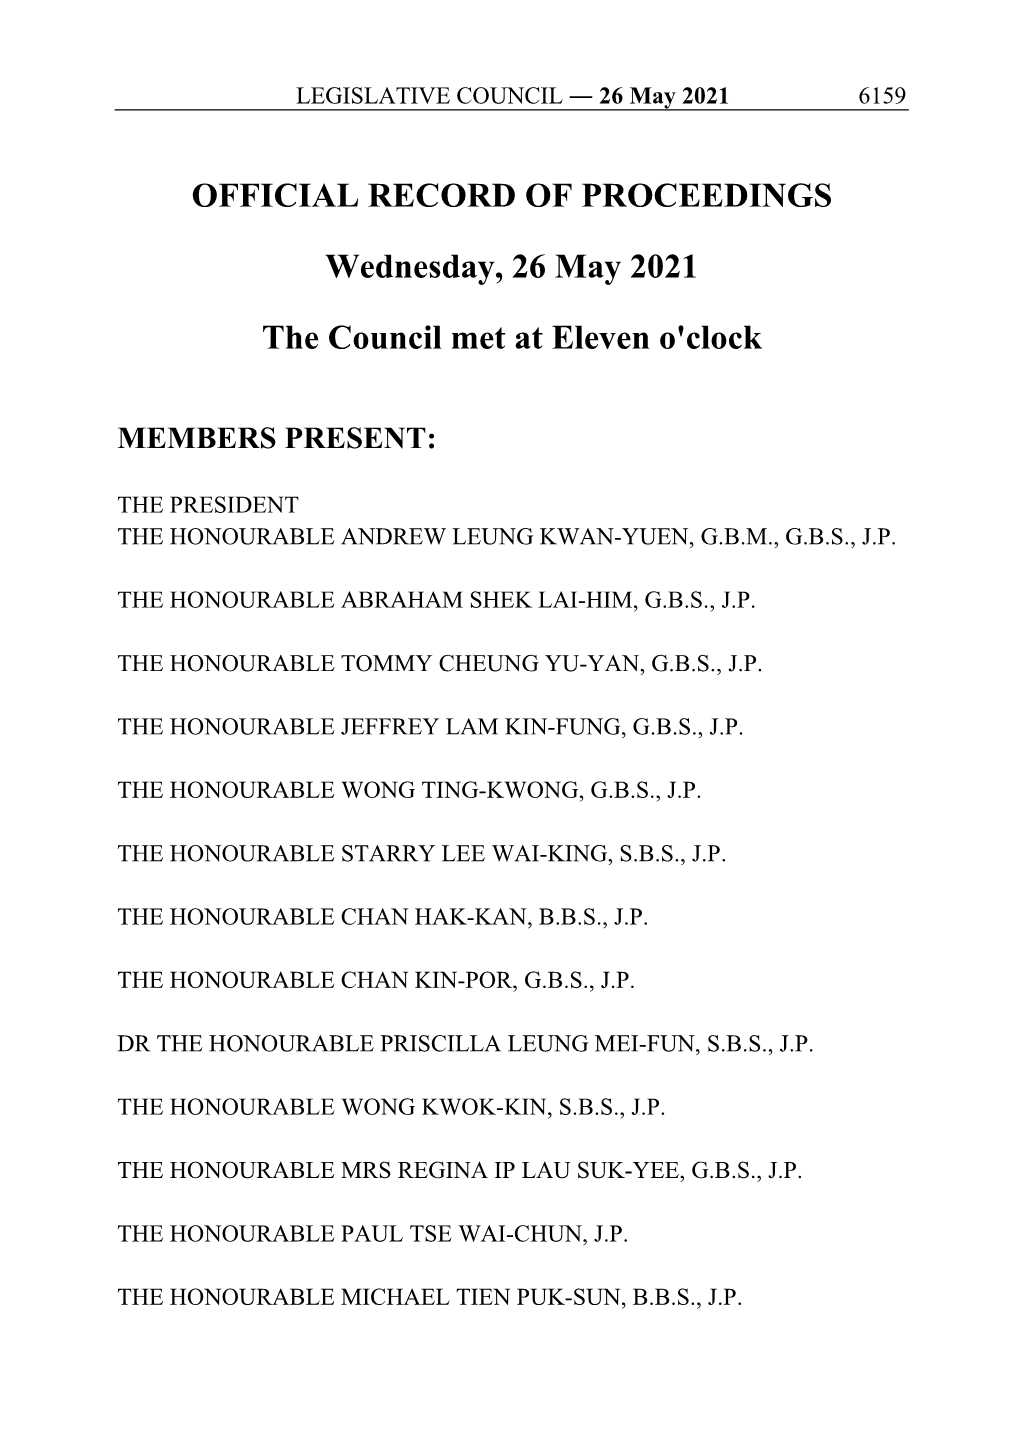 OFFICIAL RECORD of PROCEEDINGS Wednesday, 26